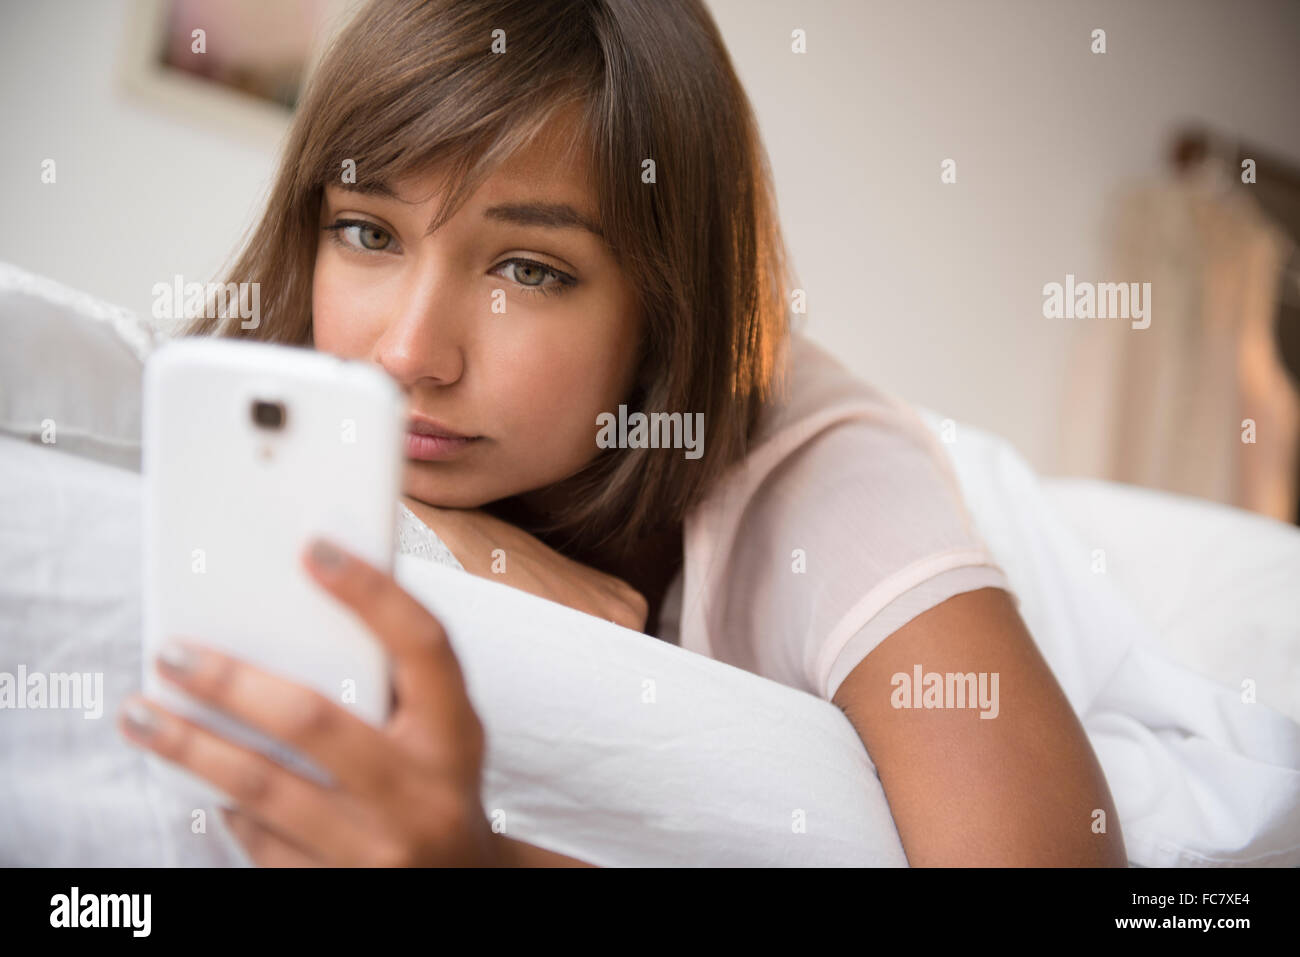 Mixed race woman using cell phone Stock Photo